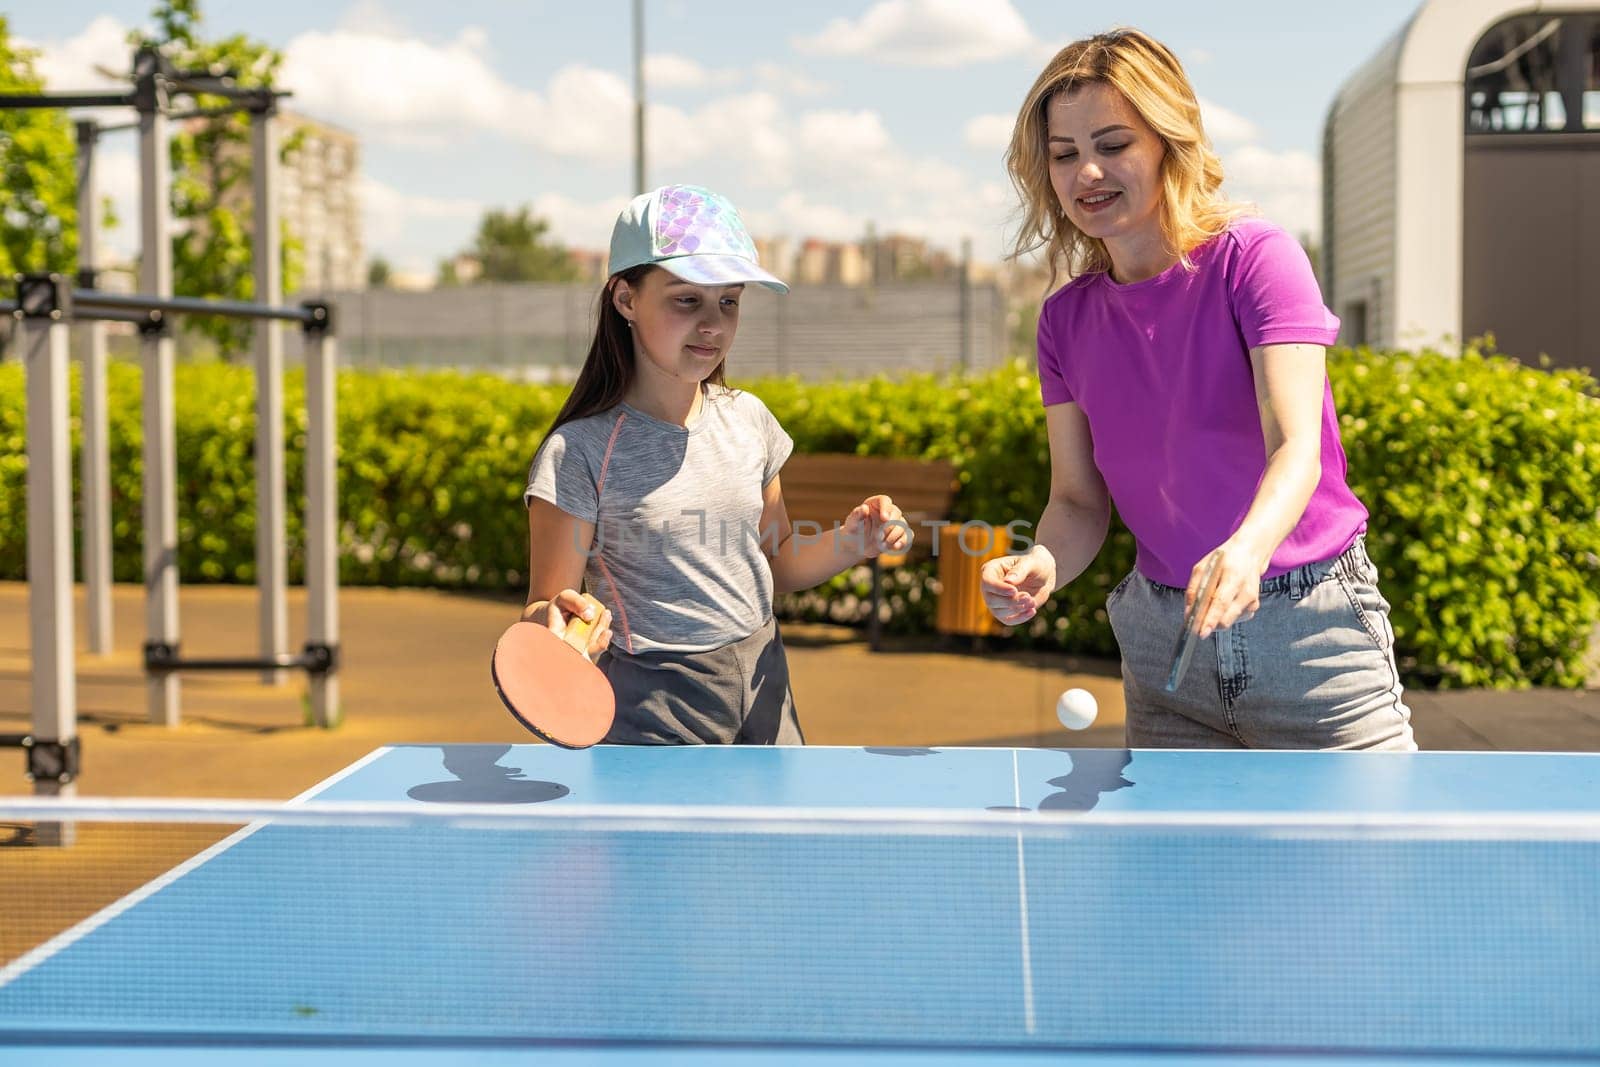 Young woman with her daughter playing ping pong in park by Andelov13